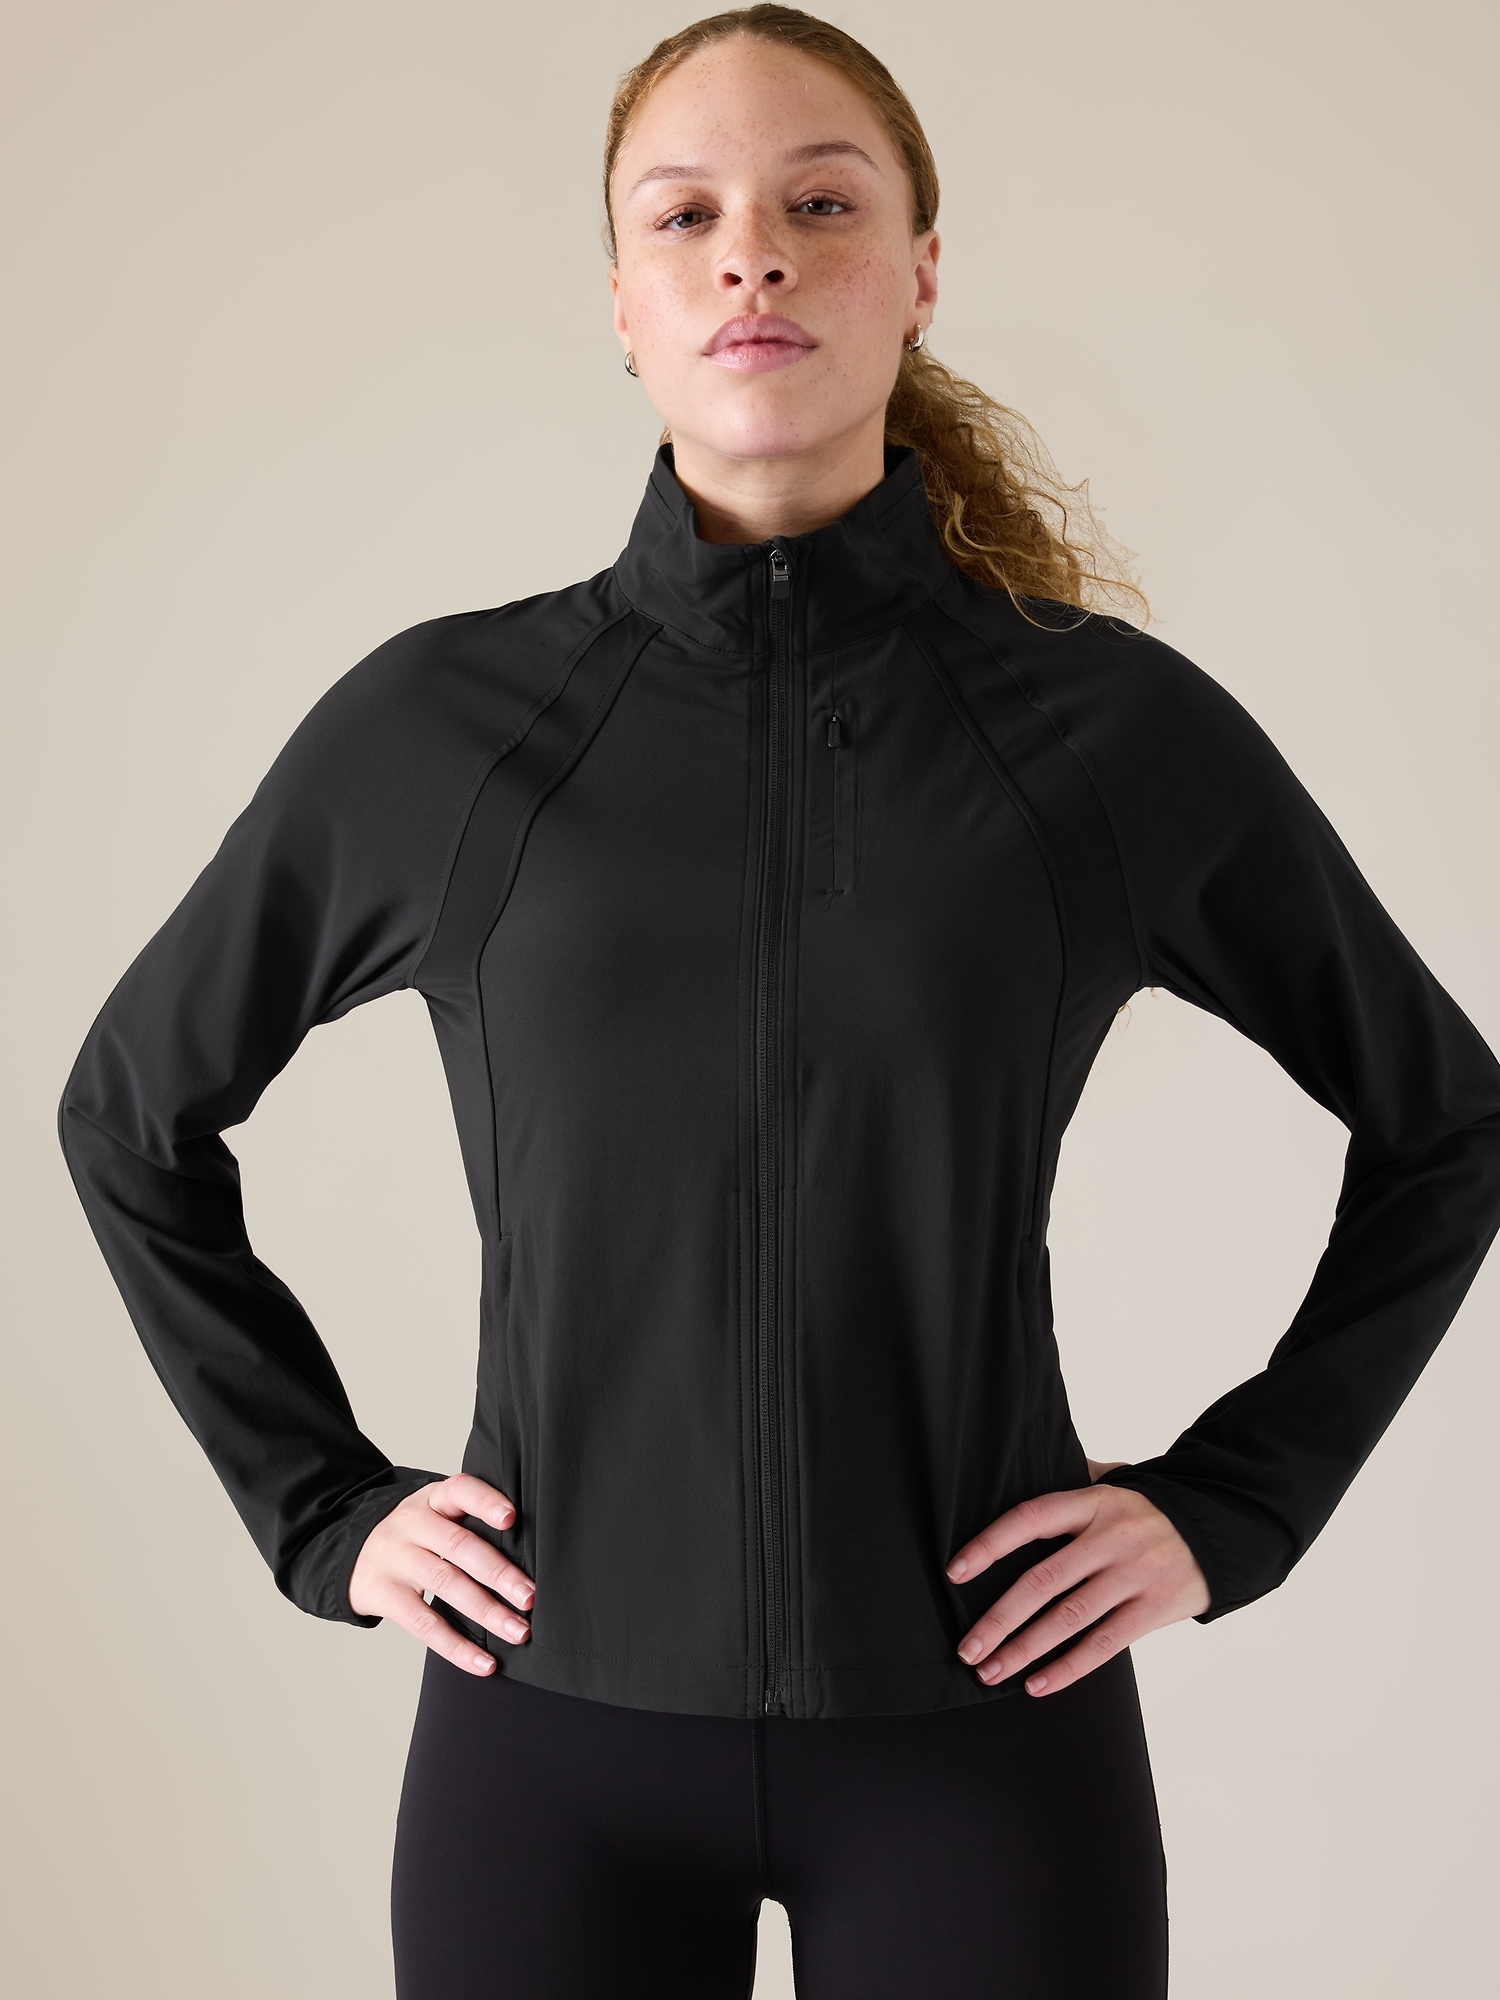  Women's Athletic Jackets - Women's Athletic Jackets / Women's  Activewear: Clothing, Shoes & Jewelry